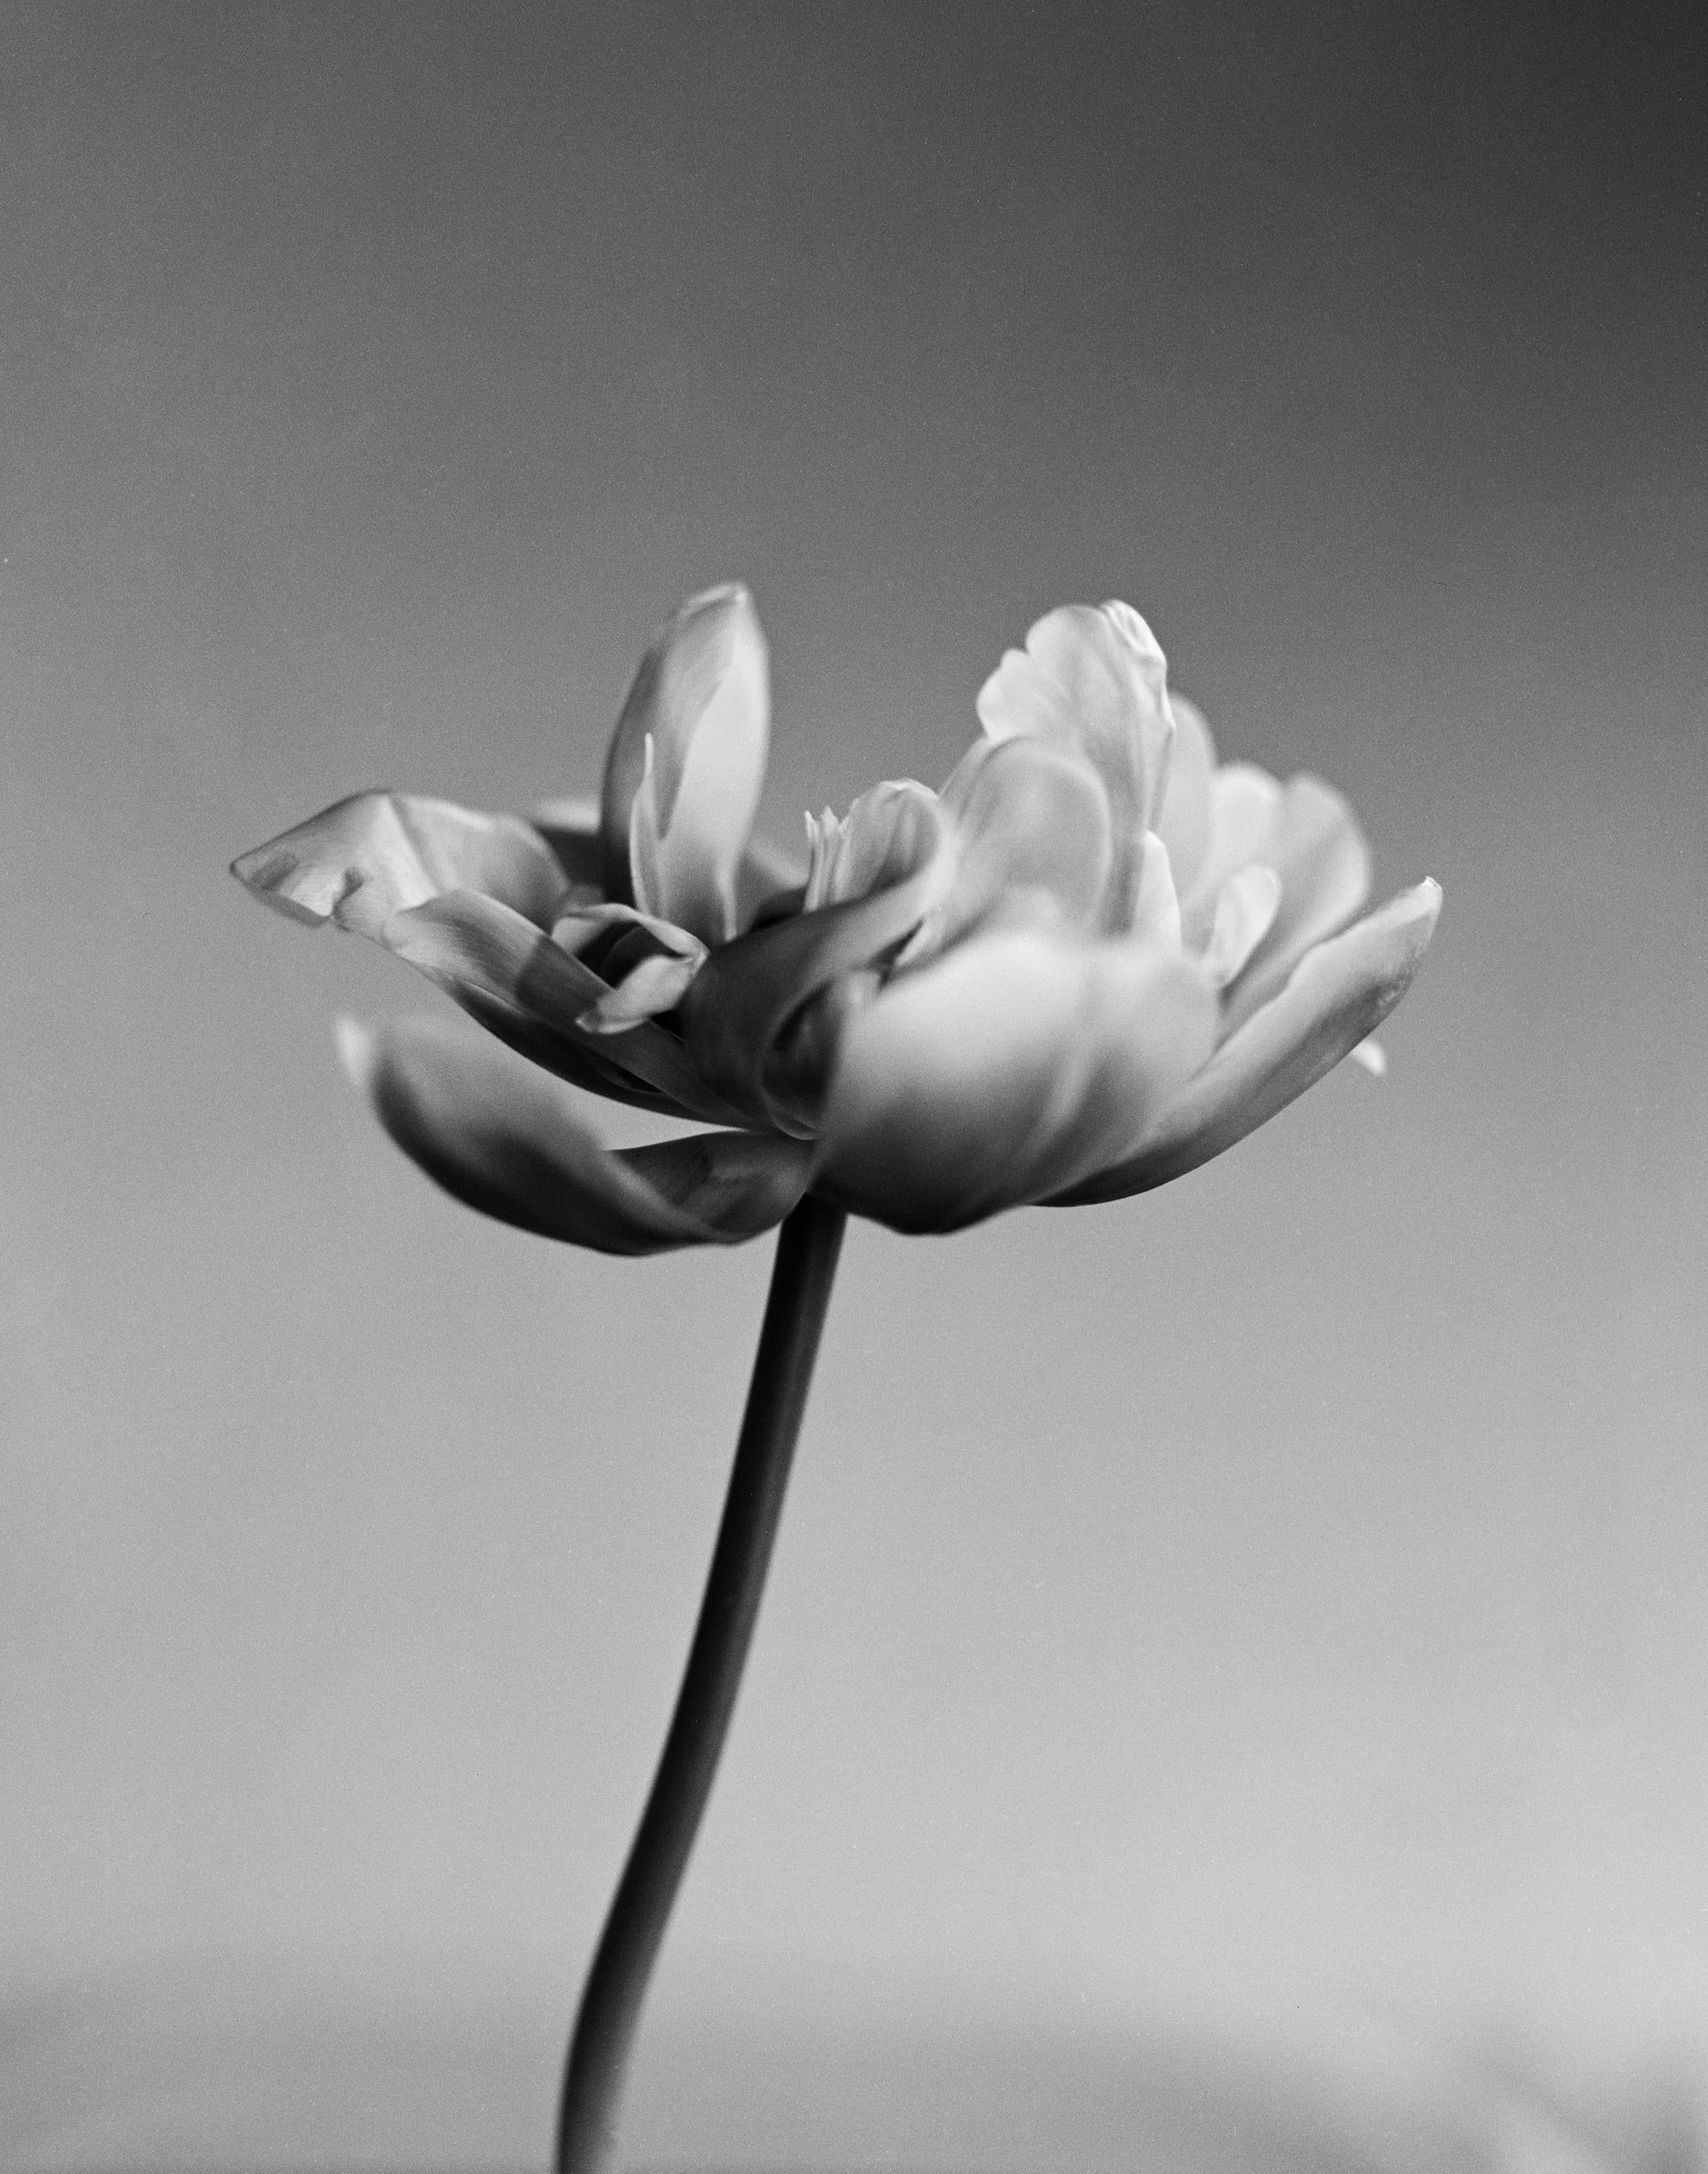 Ugne Pouwell Black and White Photograph - Tulip - analogue black and white floral photography, Limited edition of 10